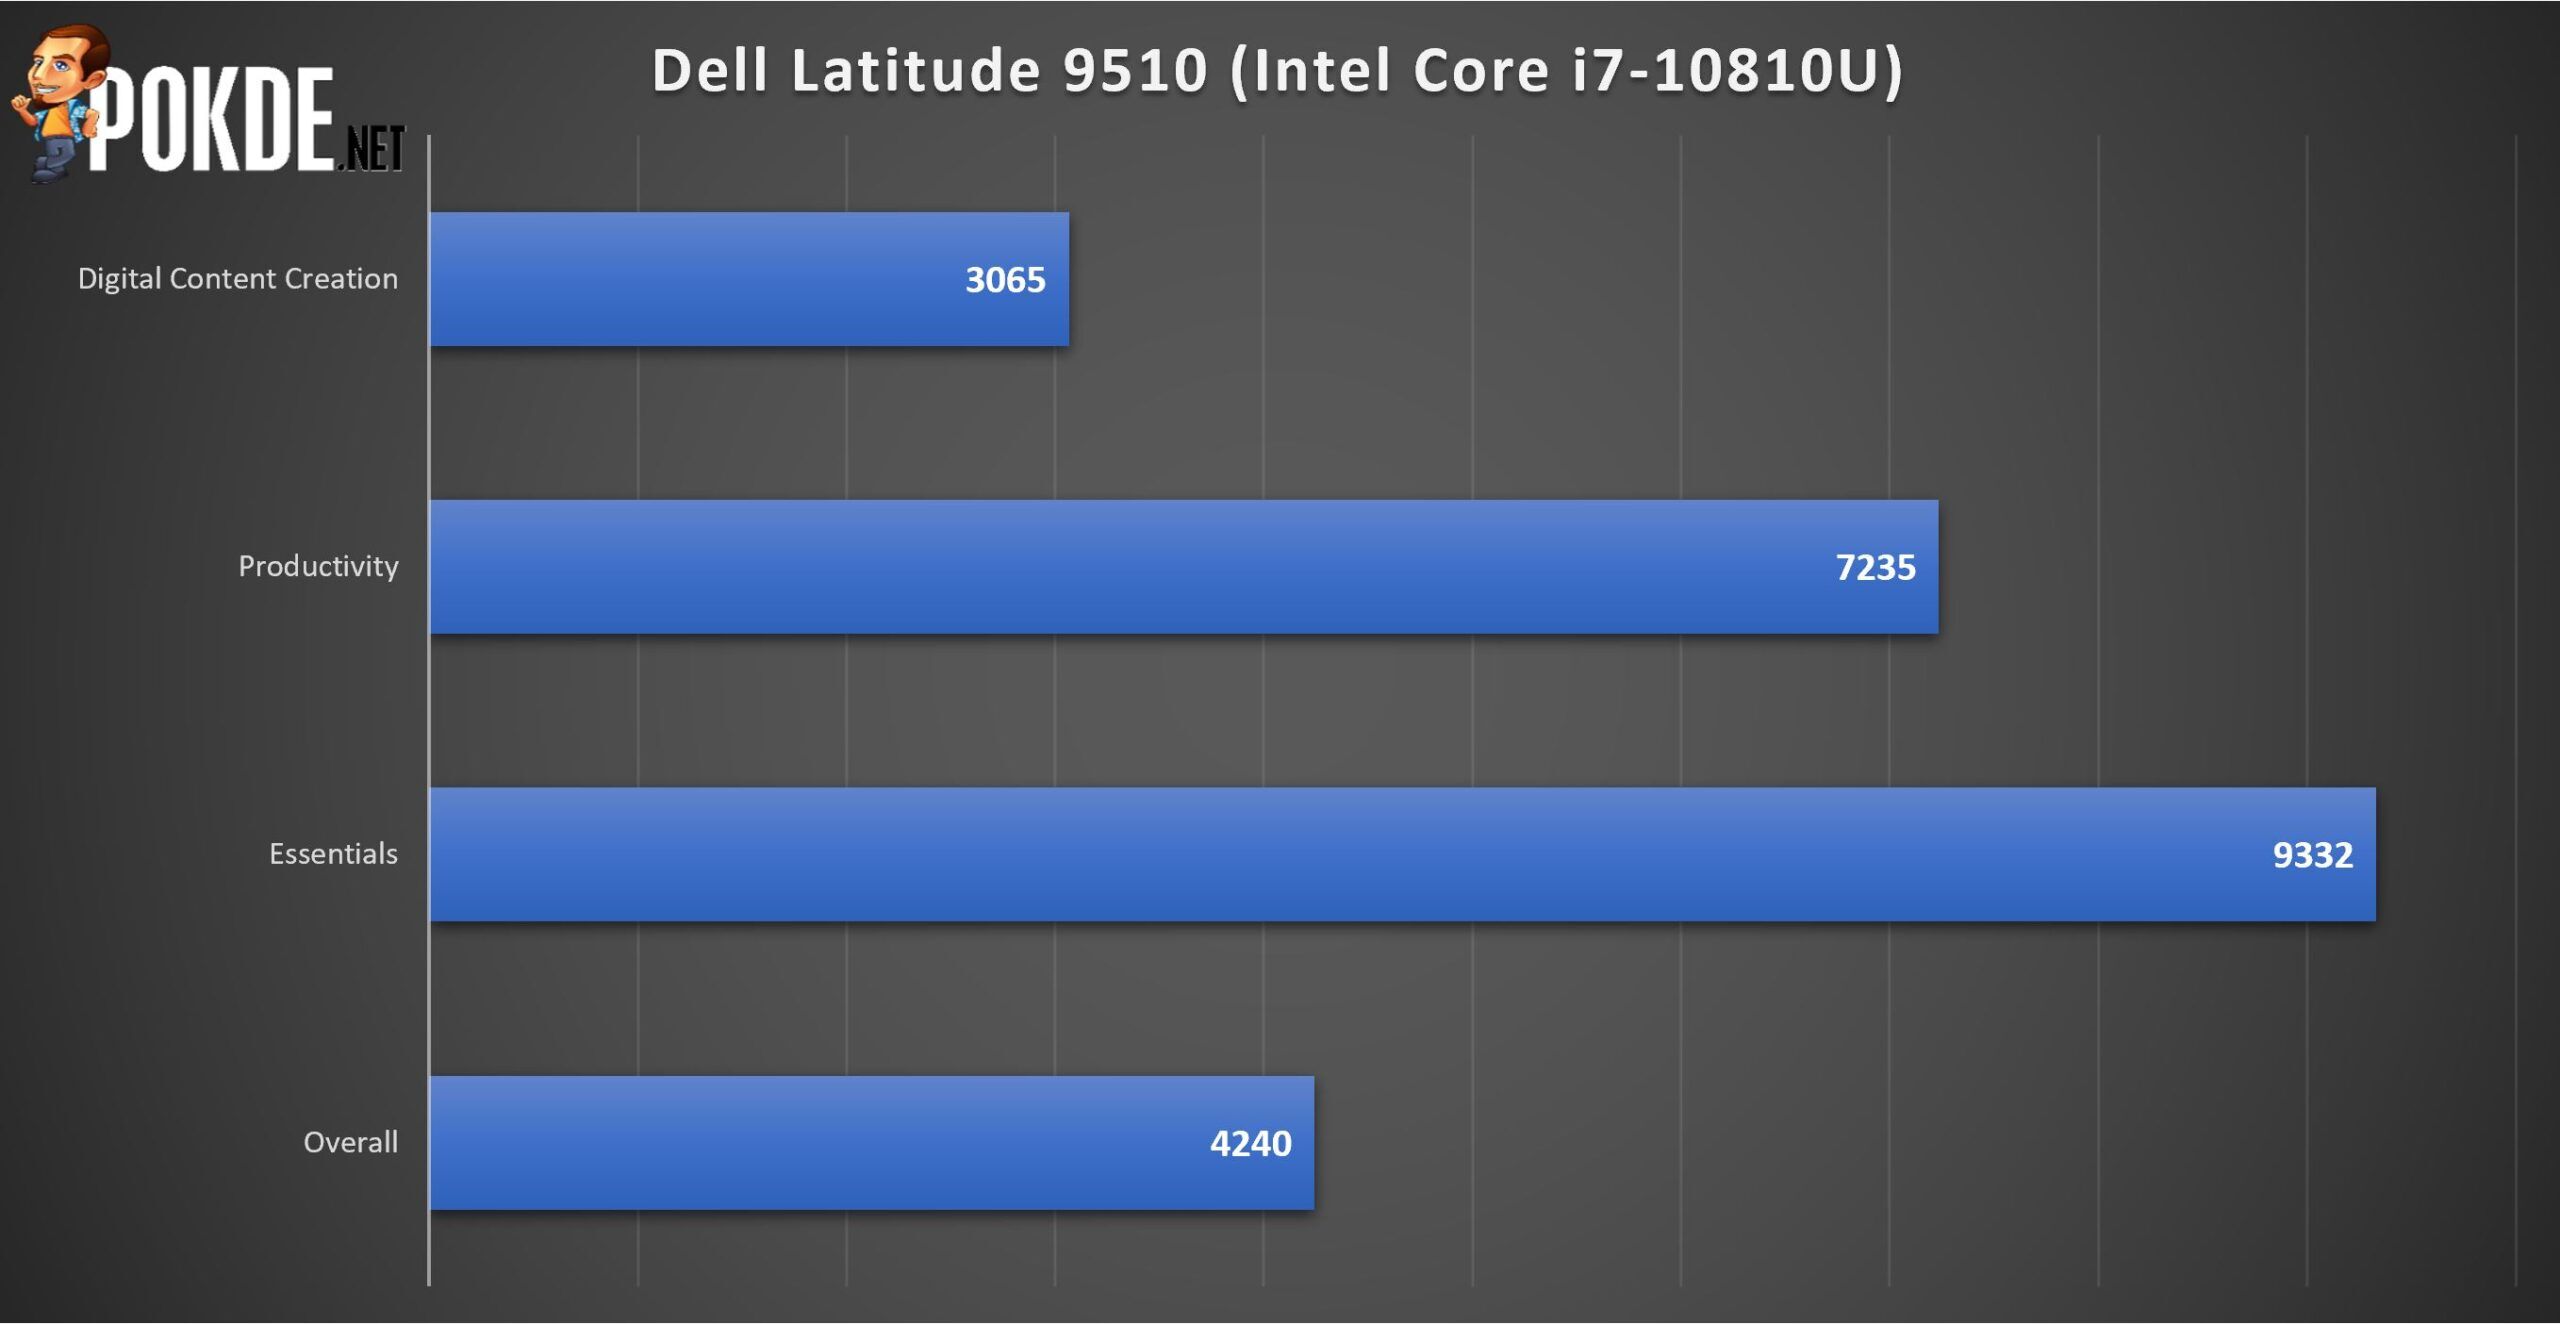 Dell Latitude 9510 2-in-1 Review - When Laptops Truly Mean Business 35